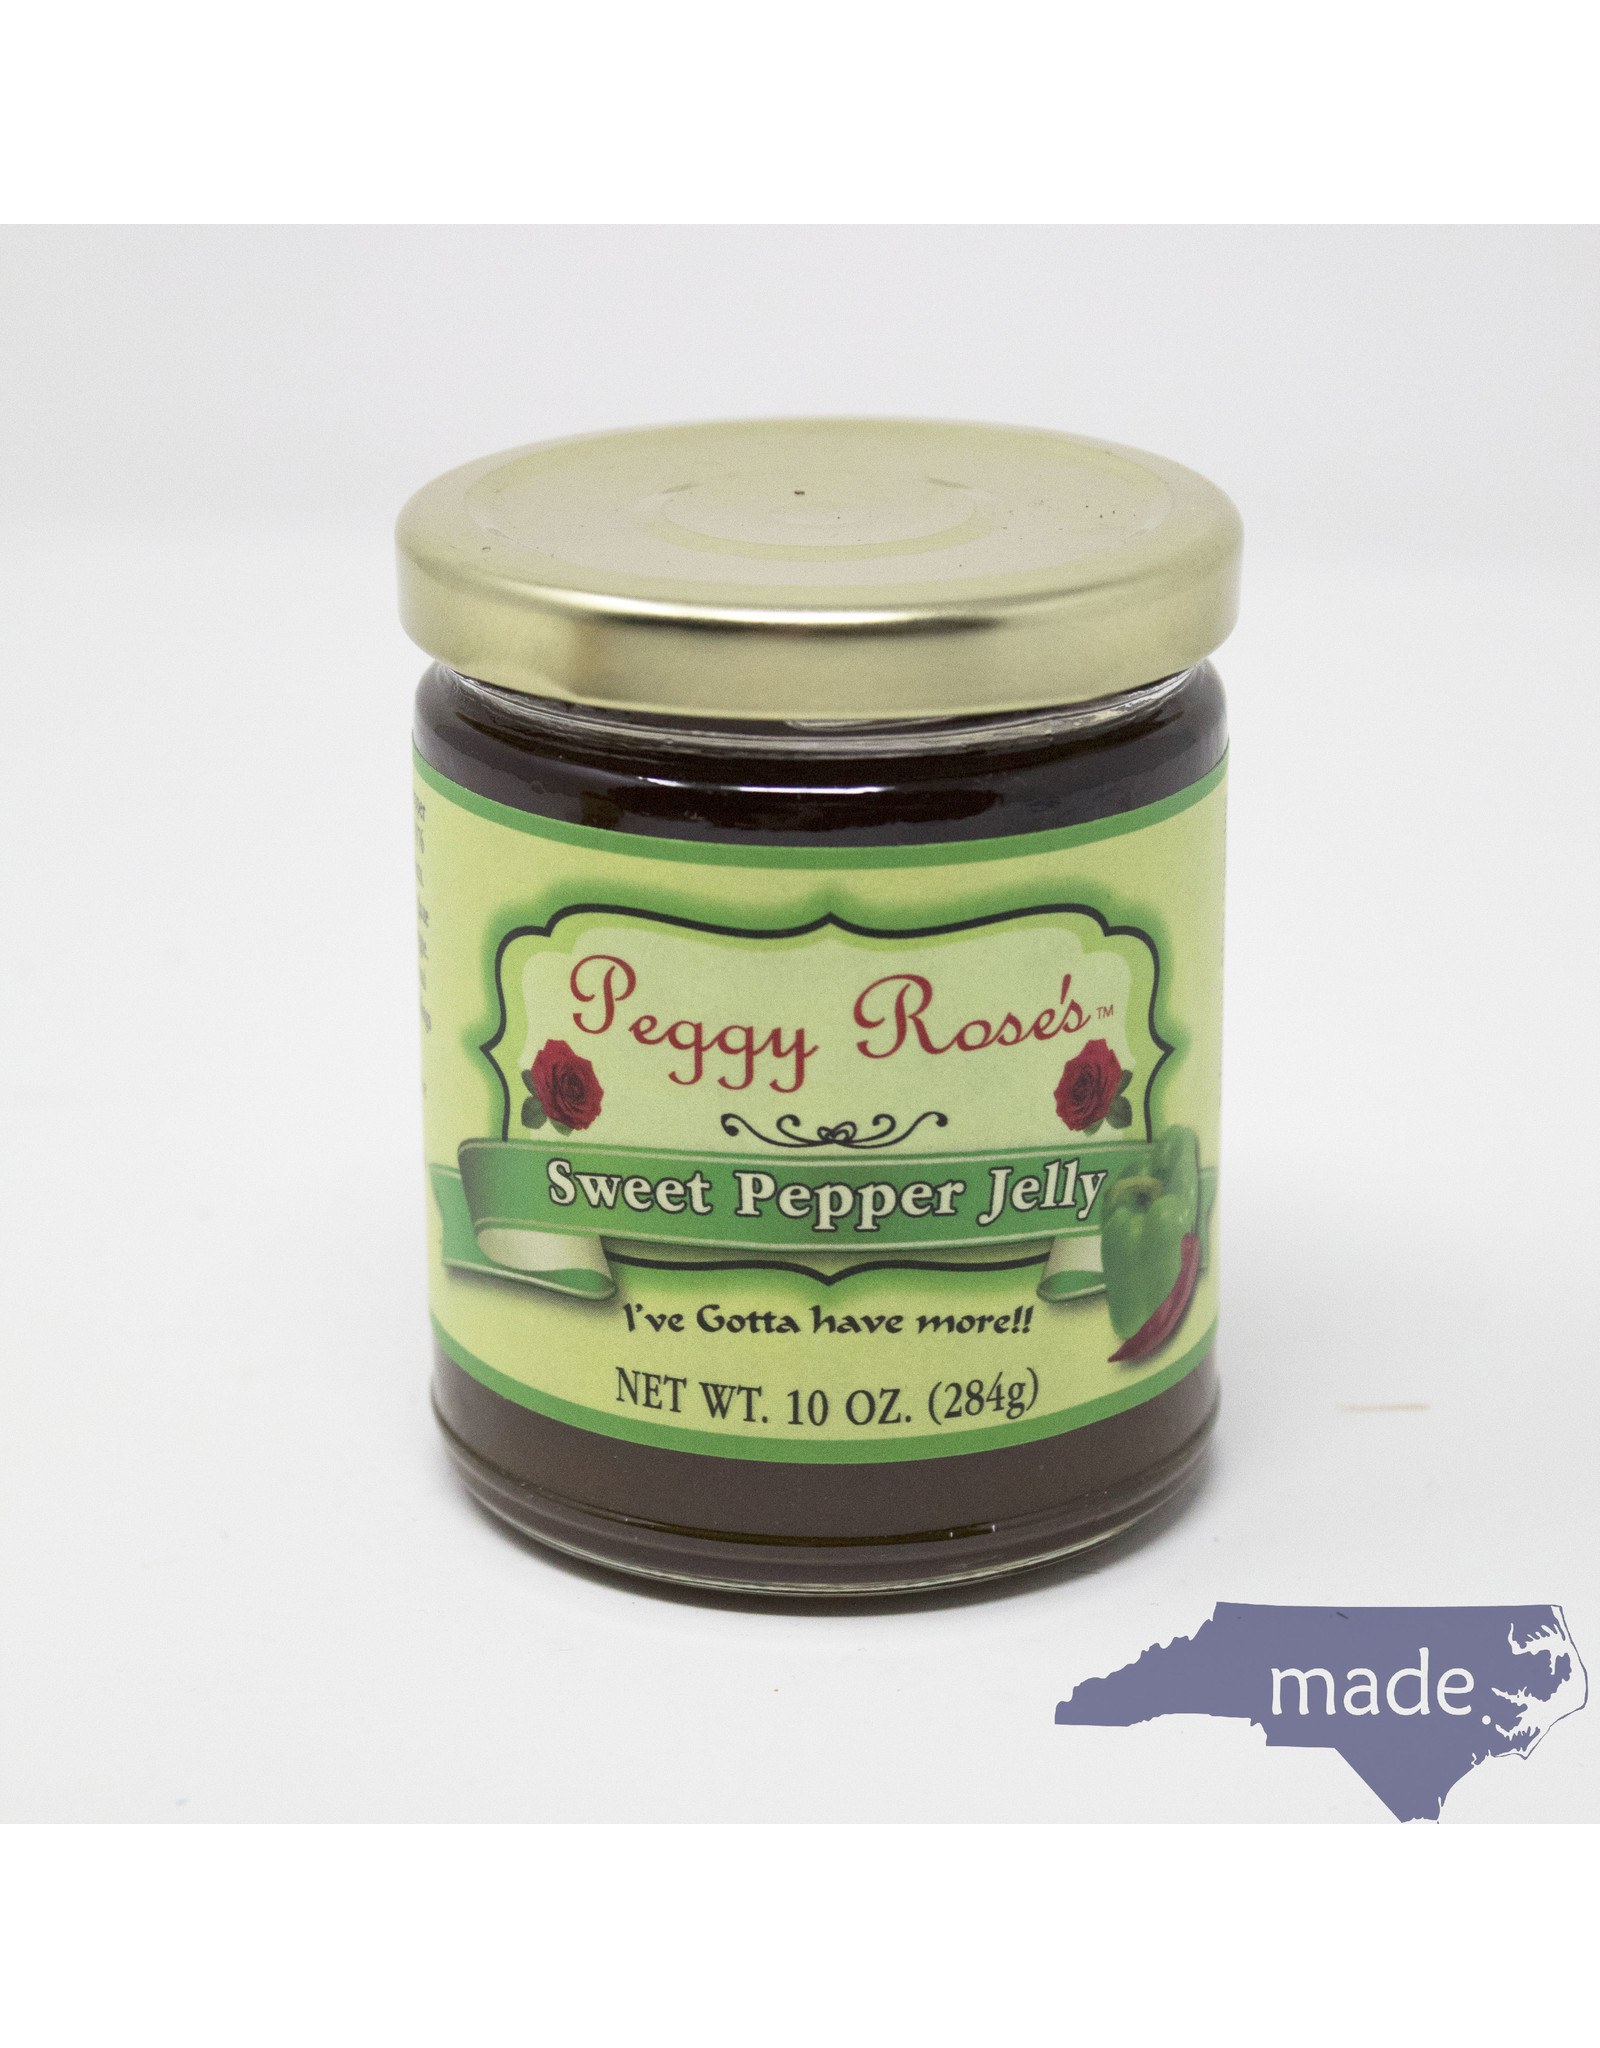 Peggy Rose's Sweet Pepper Jelly - Peggy Rose's